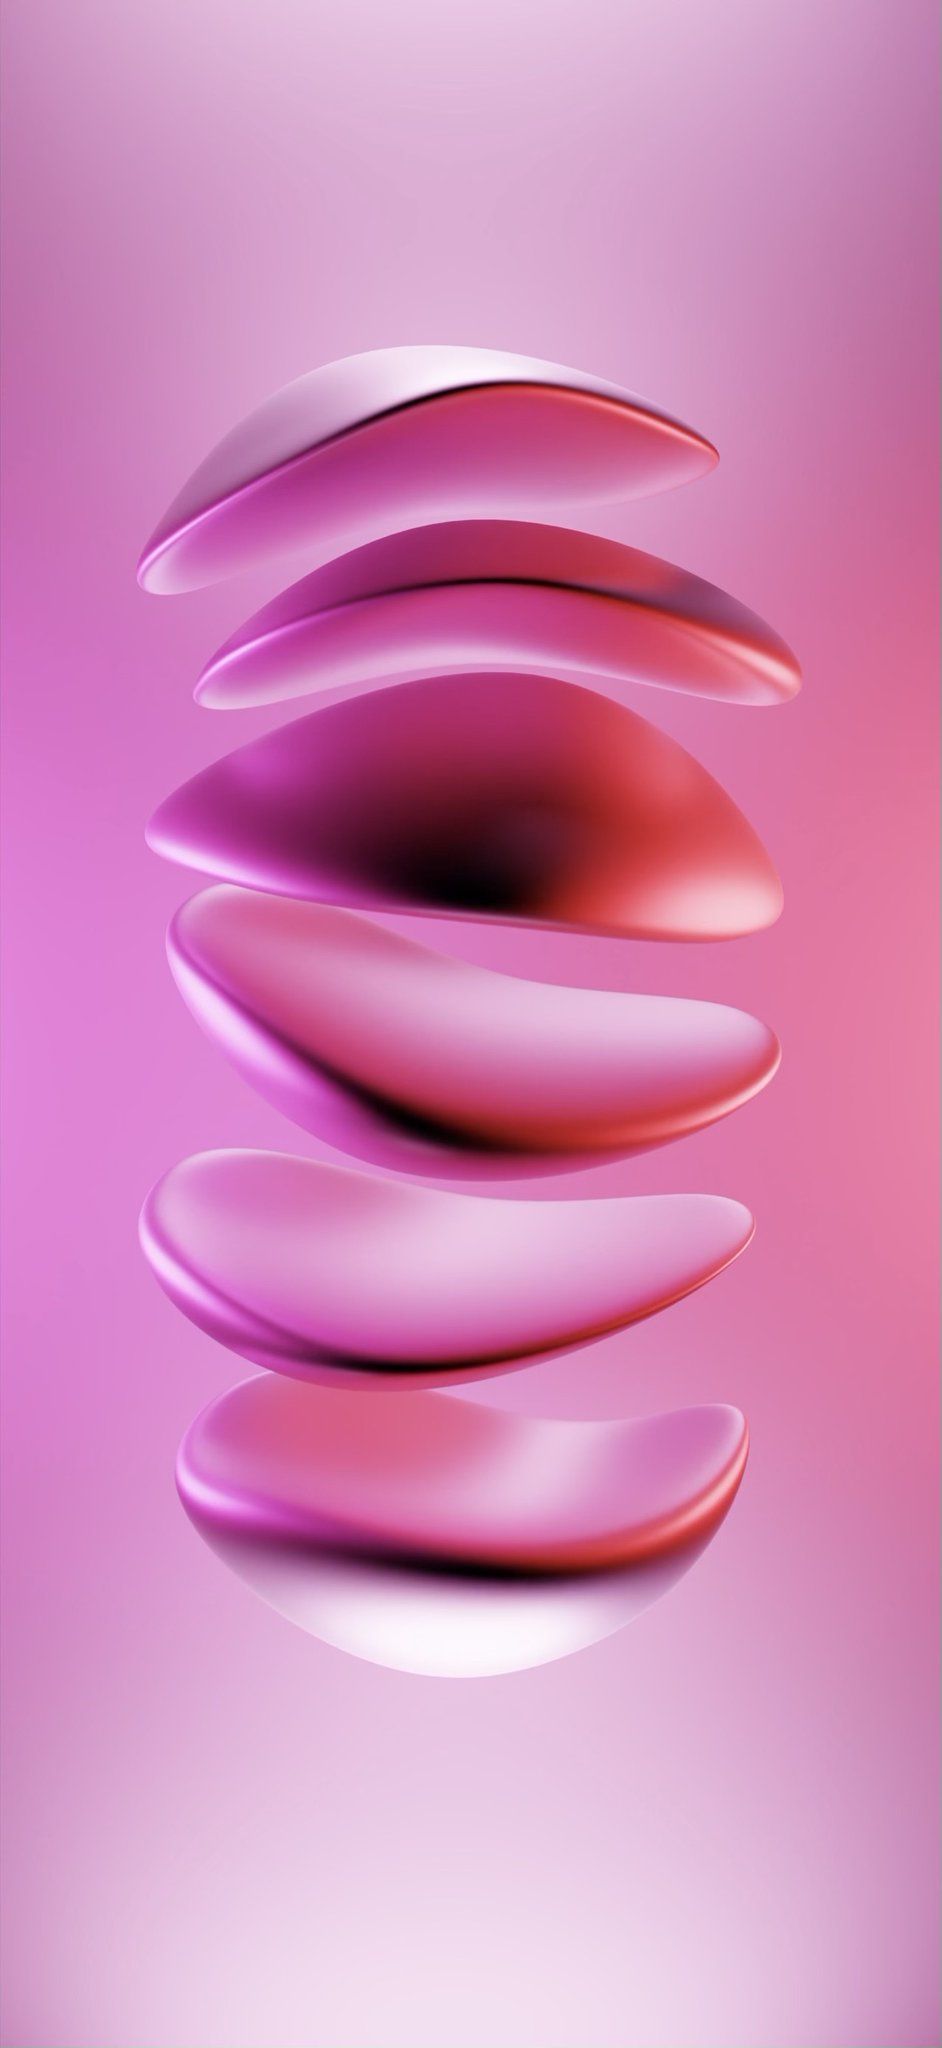 A stack of pink and red 3D shapes on a pink background - 3D